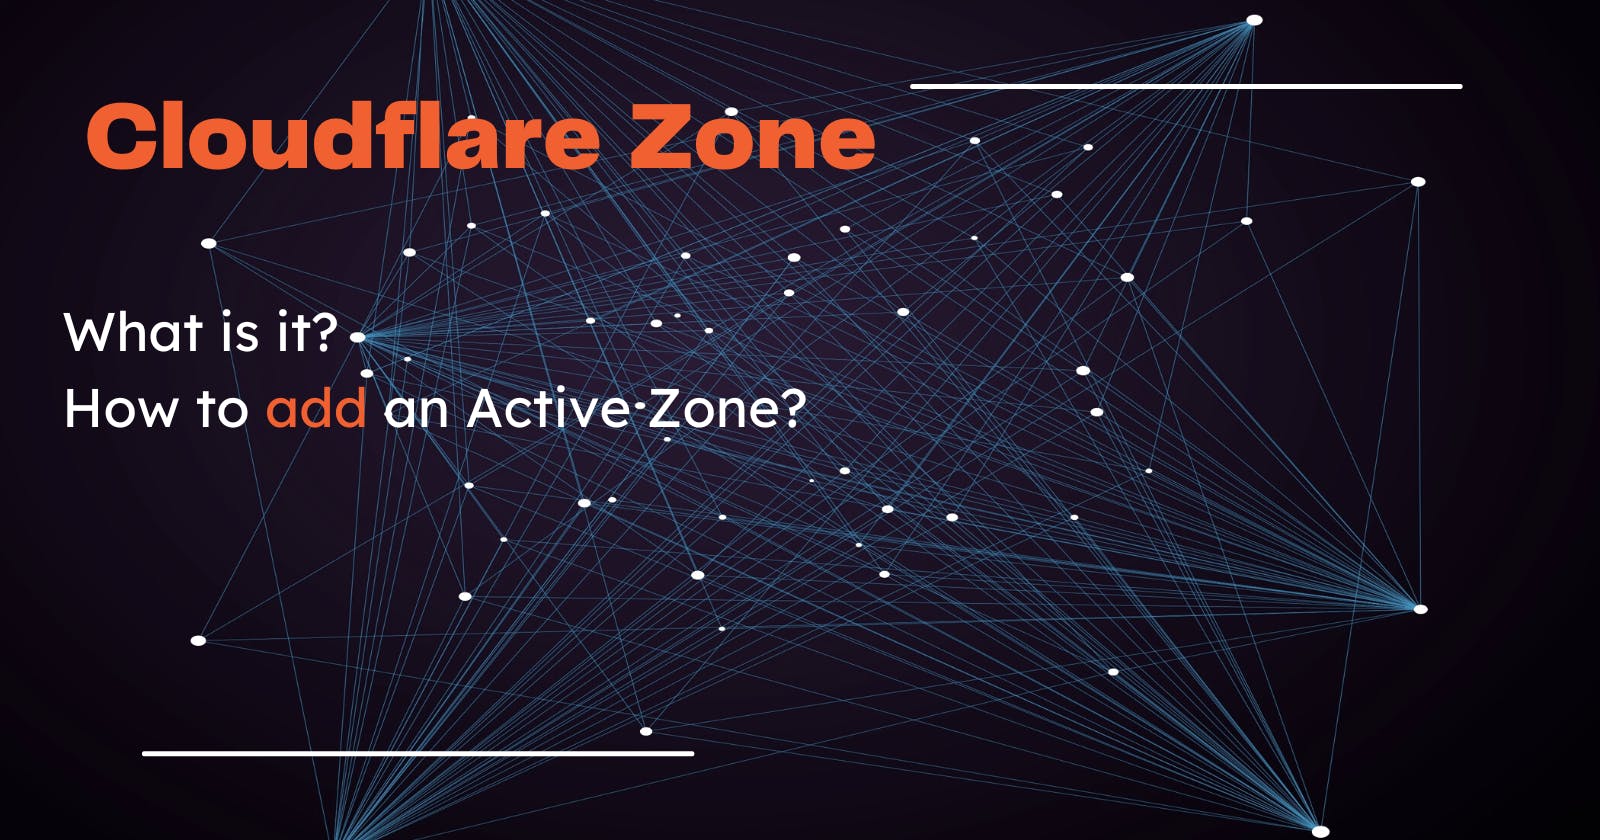 How to add an Active Zone in Cloudflare